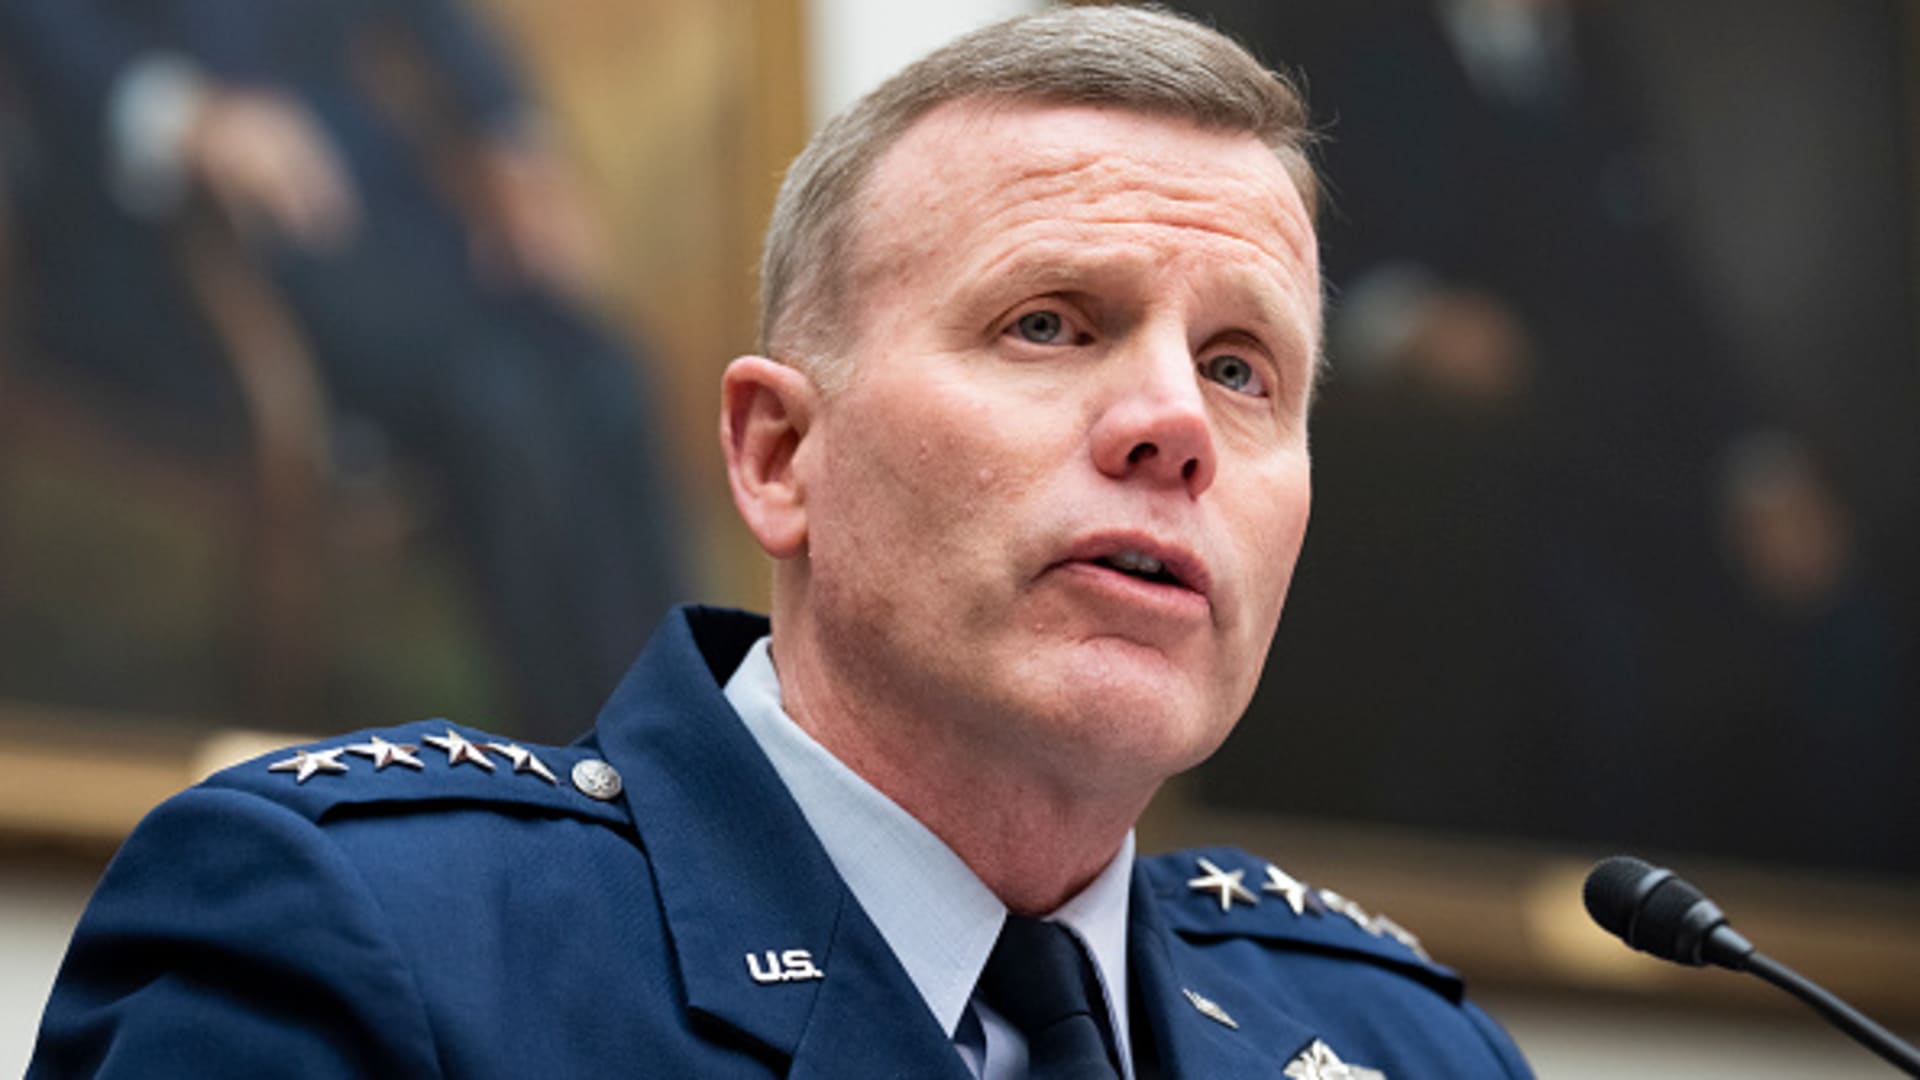 General Tod Wolters, commander, U.S. European Command, testifies during the House Armed Services Committee hearing titled National Security Challenges and U.S. Military Activity in Europe, in Rayburn Building on Wednesday, March 30, 2022.